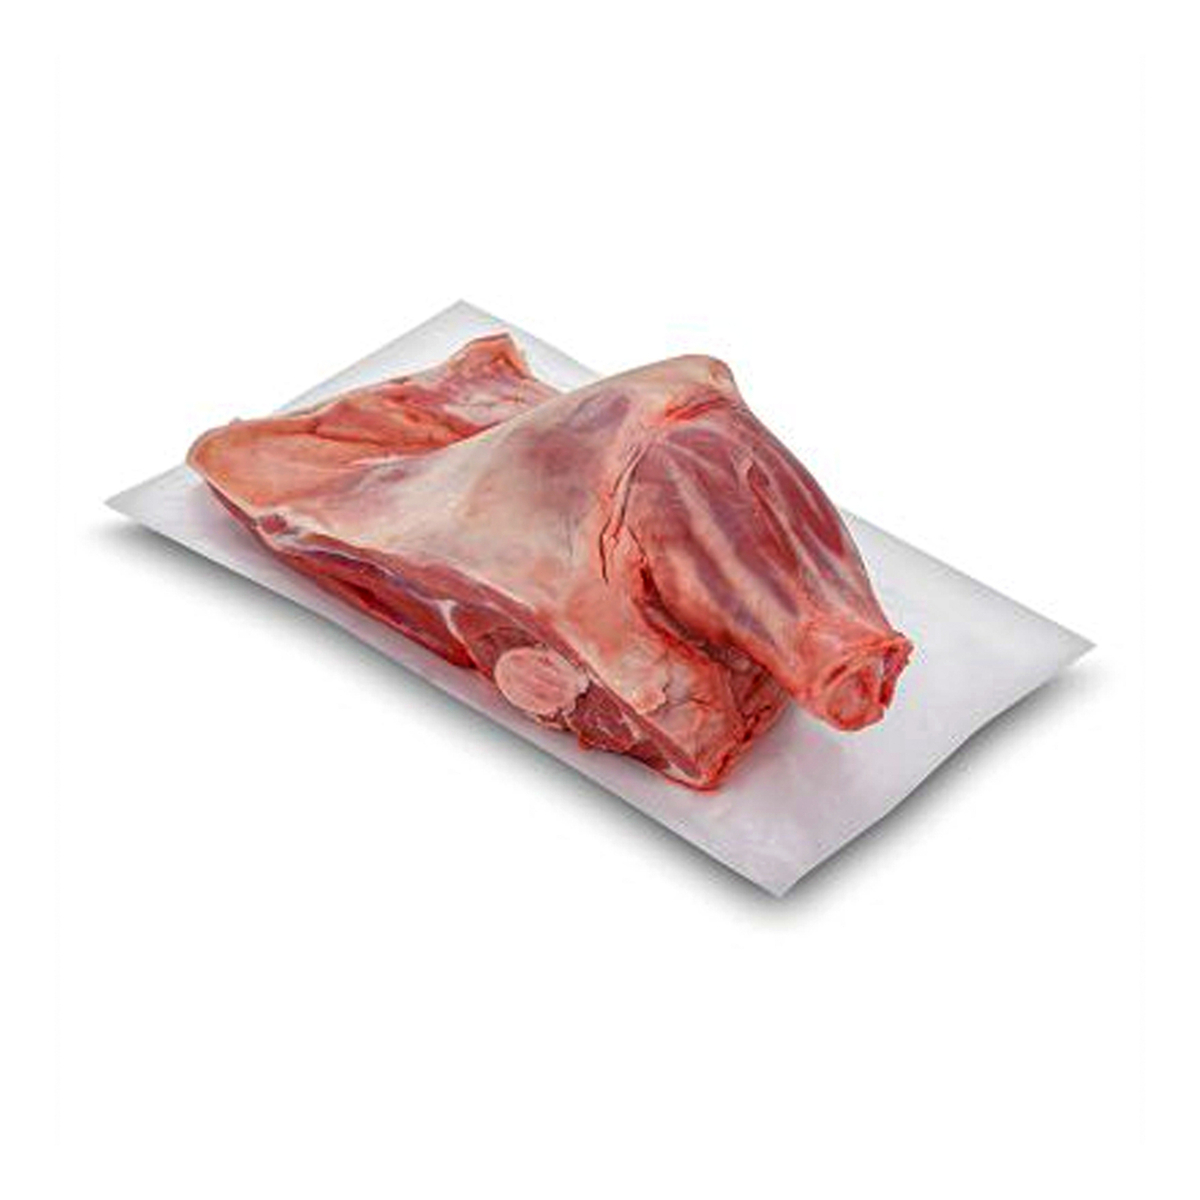 Local Lamb Shoulder 500g Approx Weight